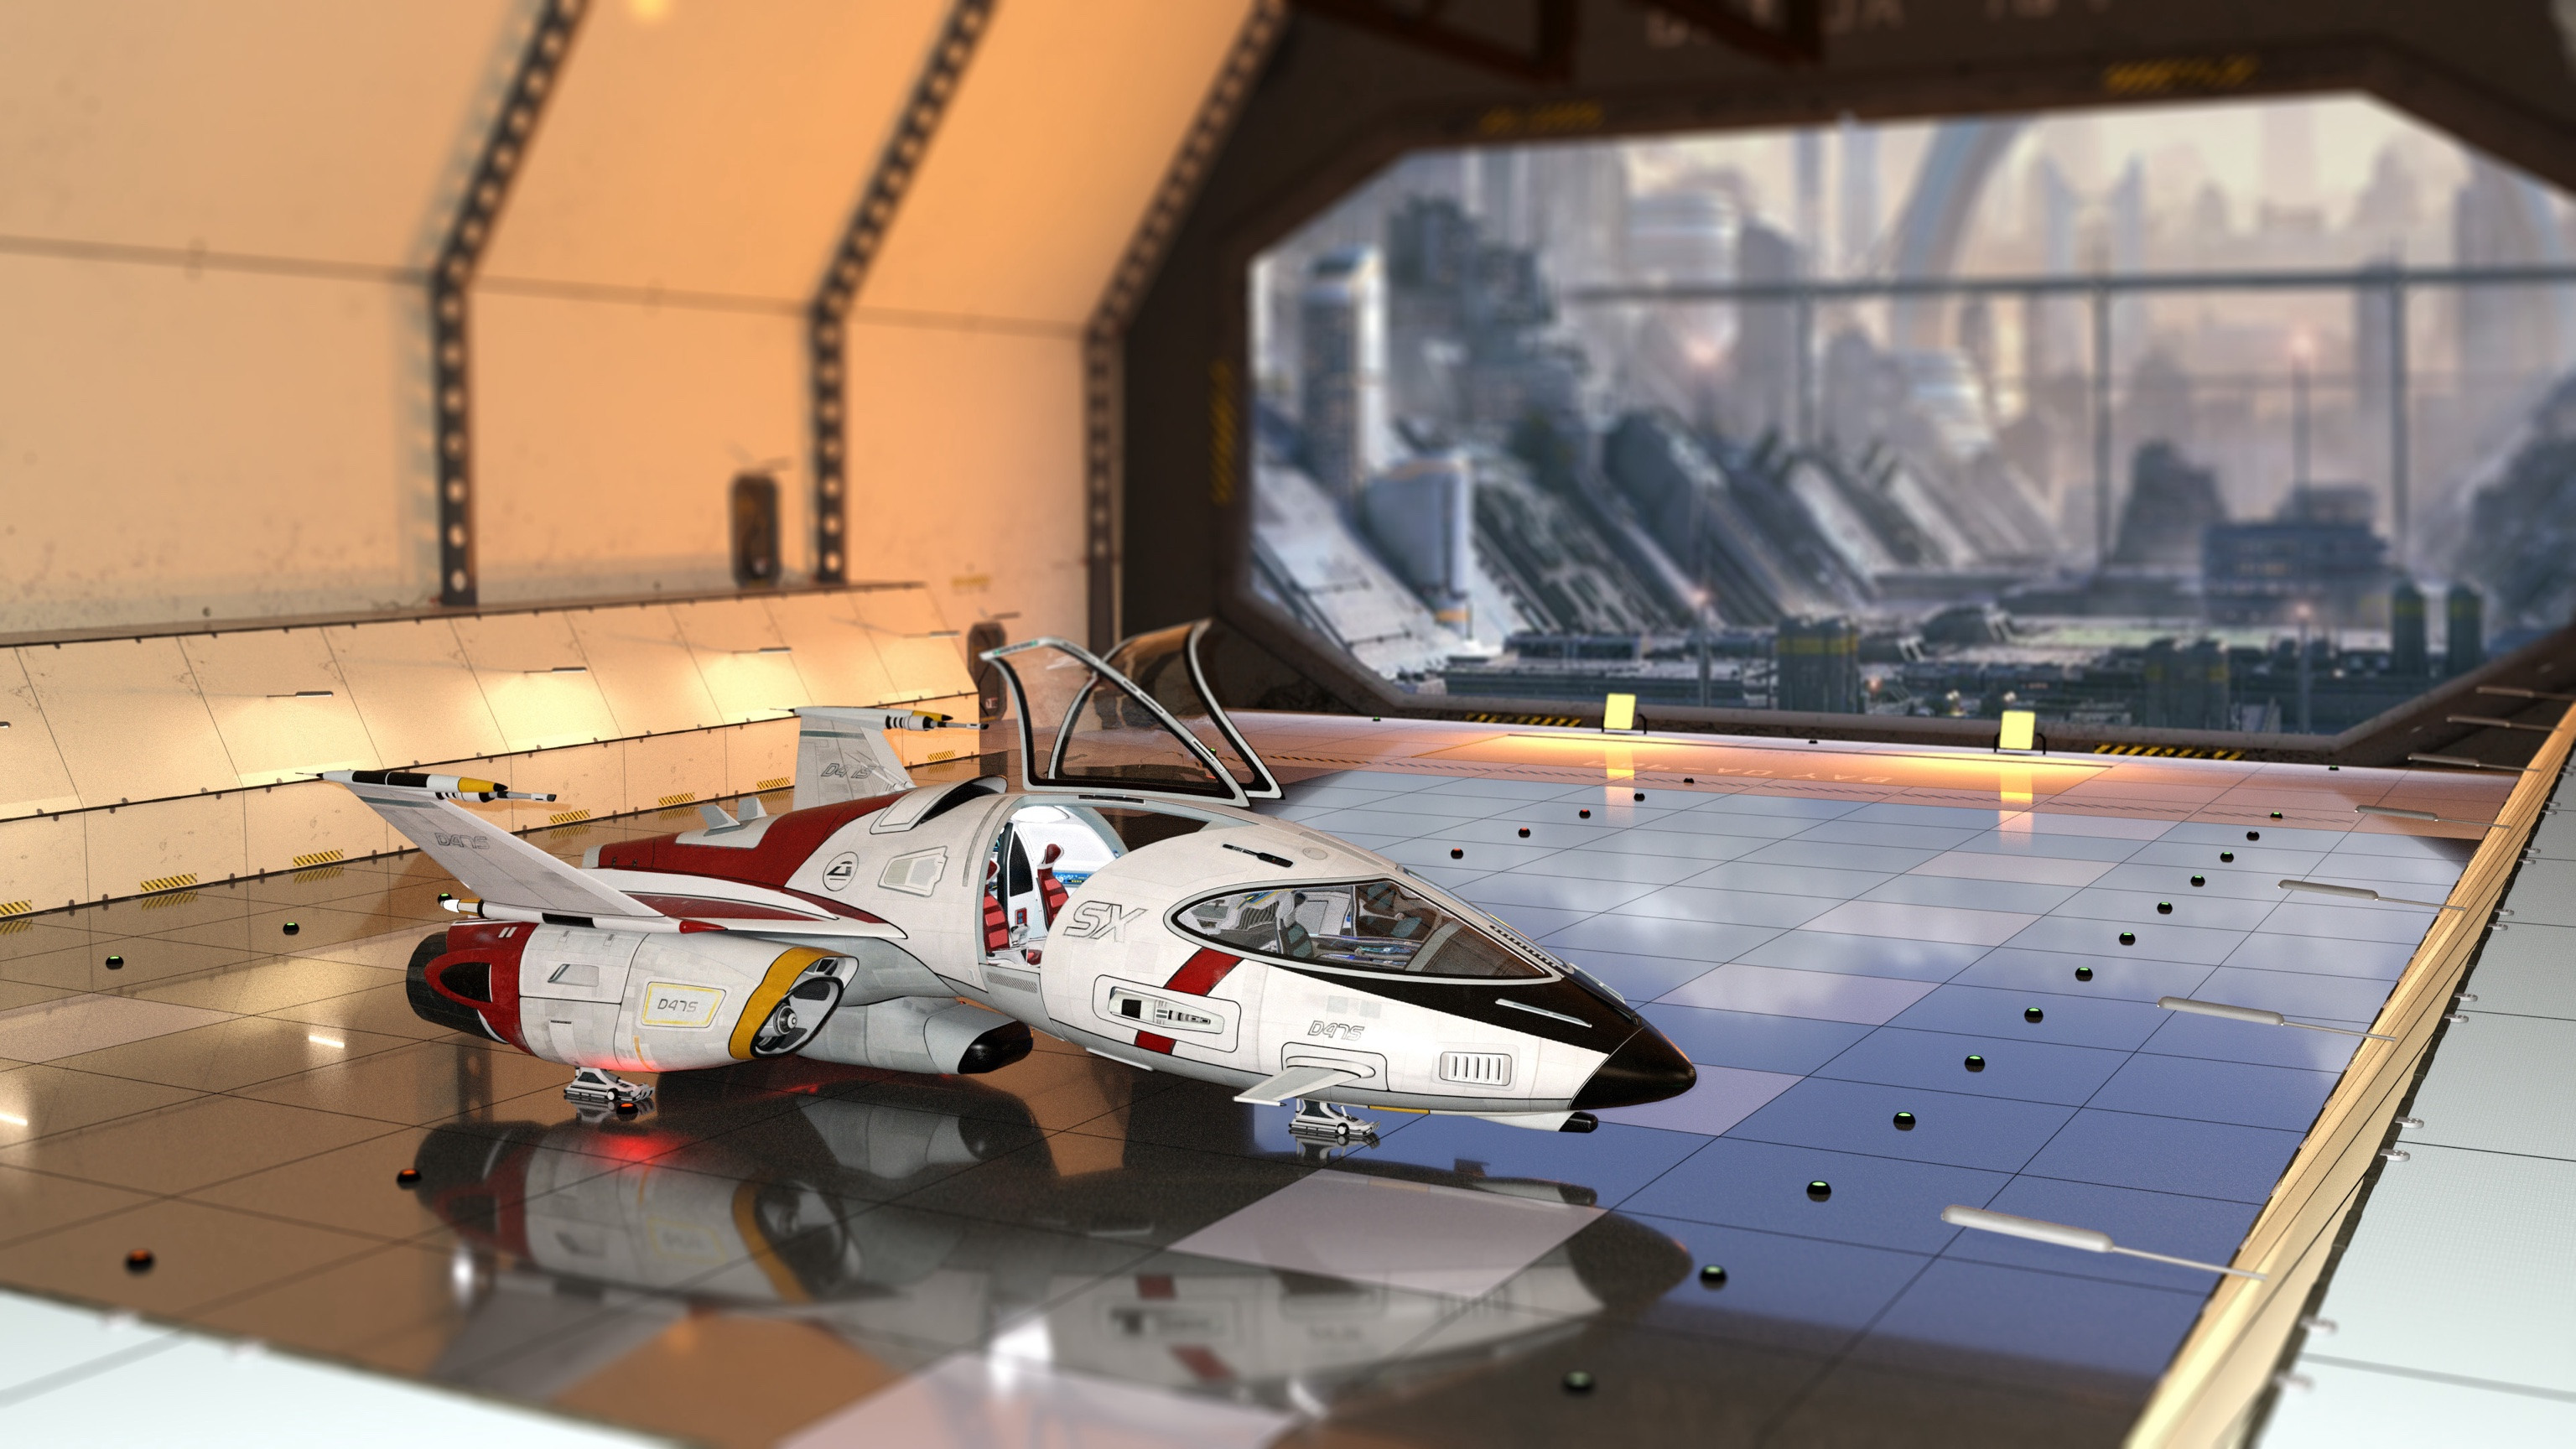 Hangar scene with the Shuttlestar, by Kibaretto one of my all time favorite 3D content creators, and whose affordable pricing I can say got me into making 3d art.